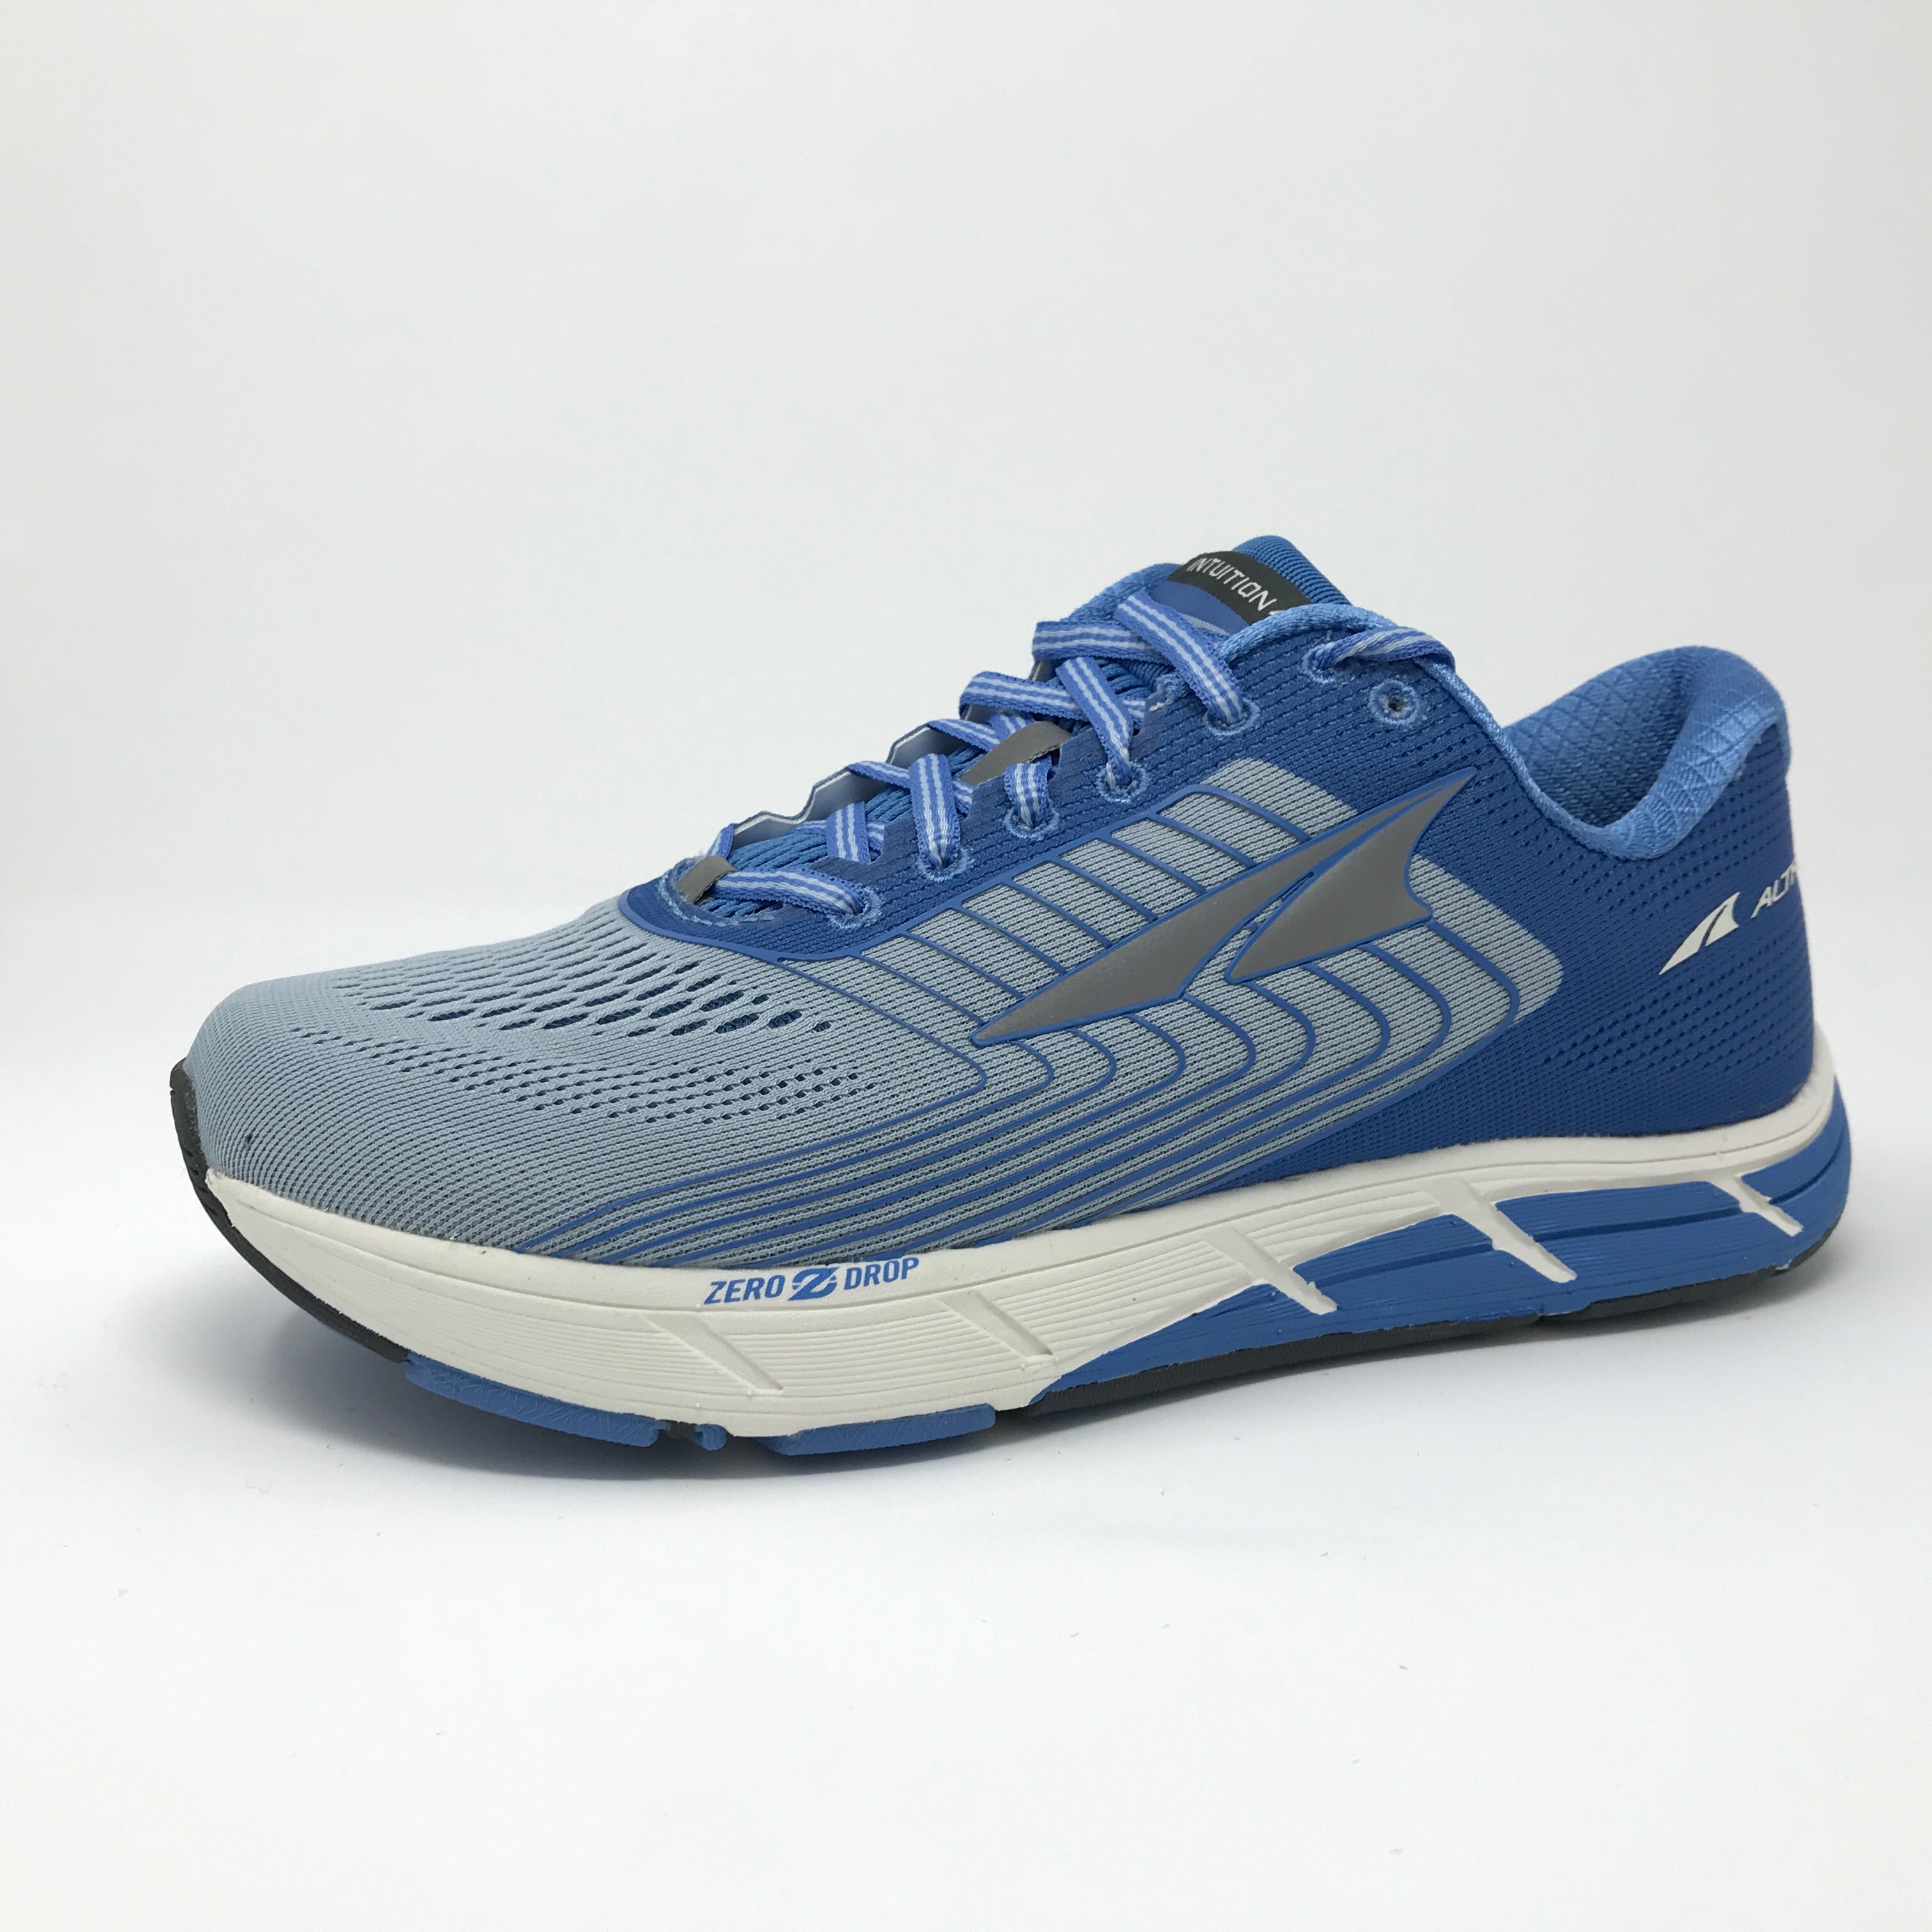 women's altra intuition 4.5